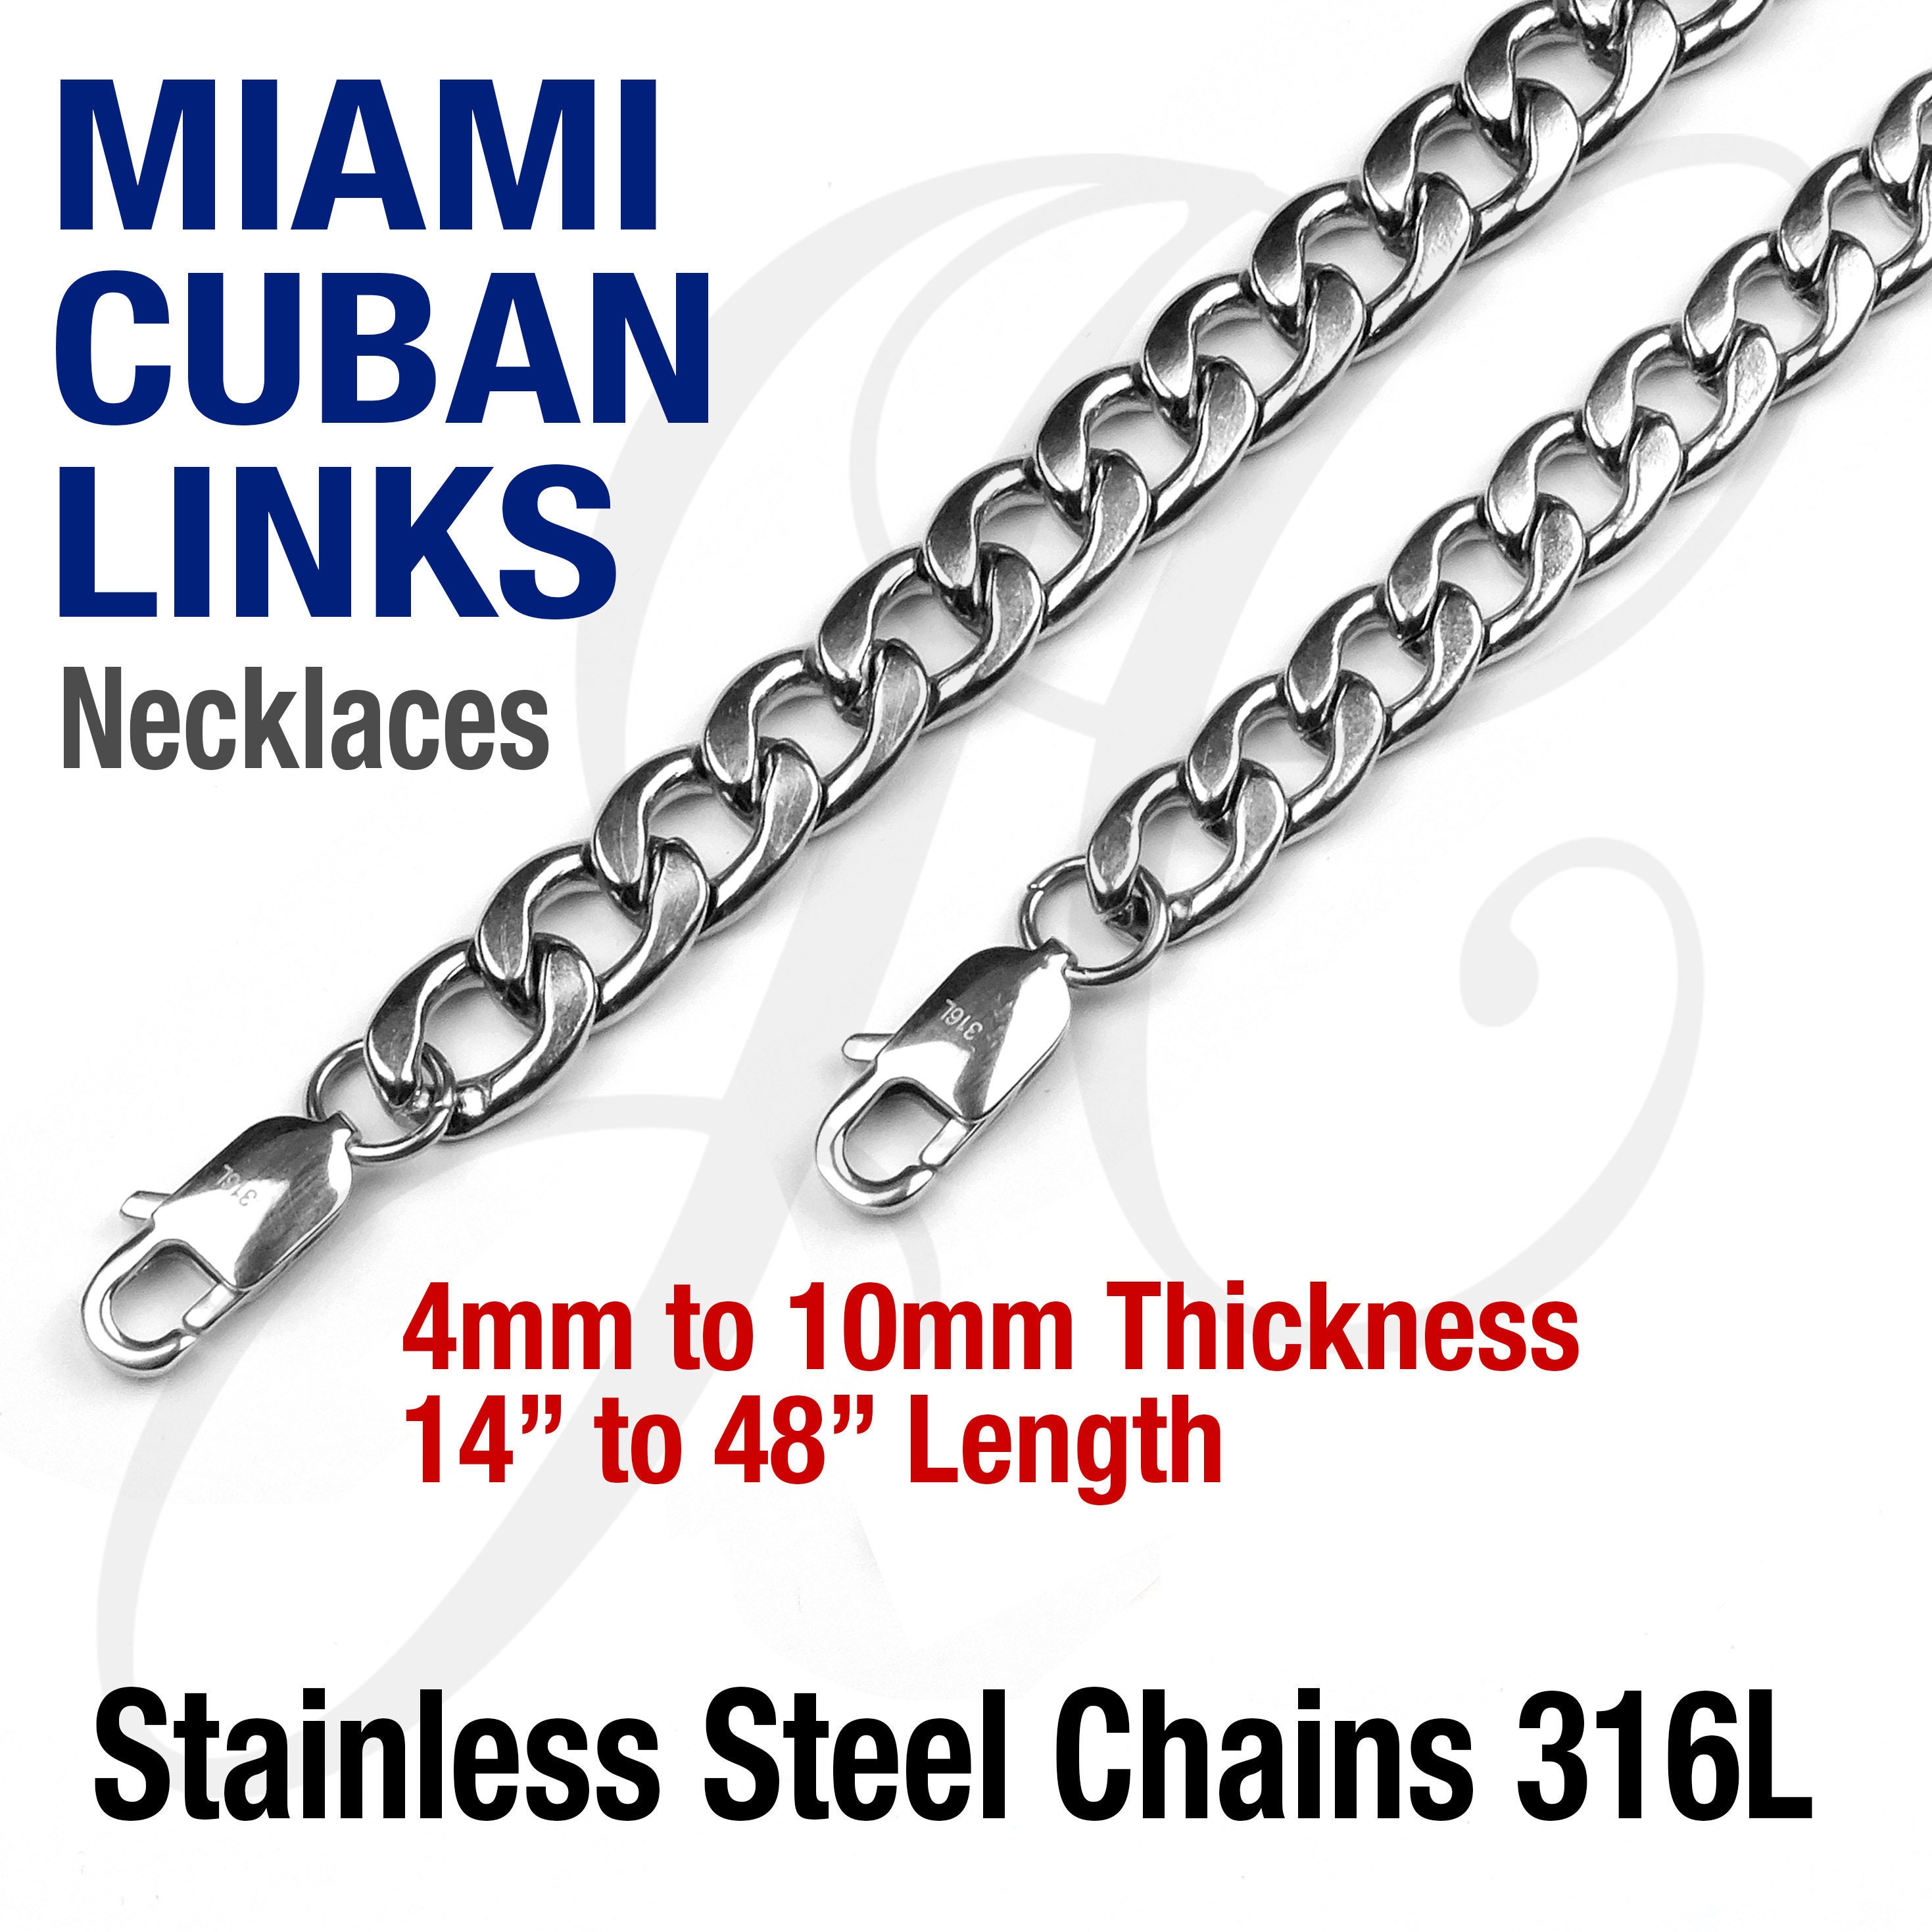 Mens 4mm Curb Cuban Stainless Steel Chain Necklace 24in